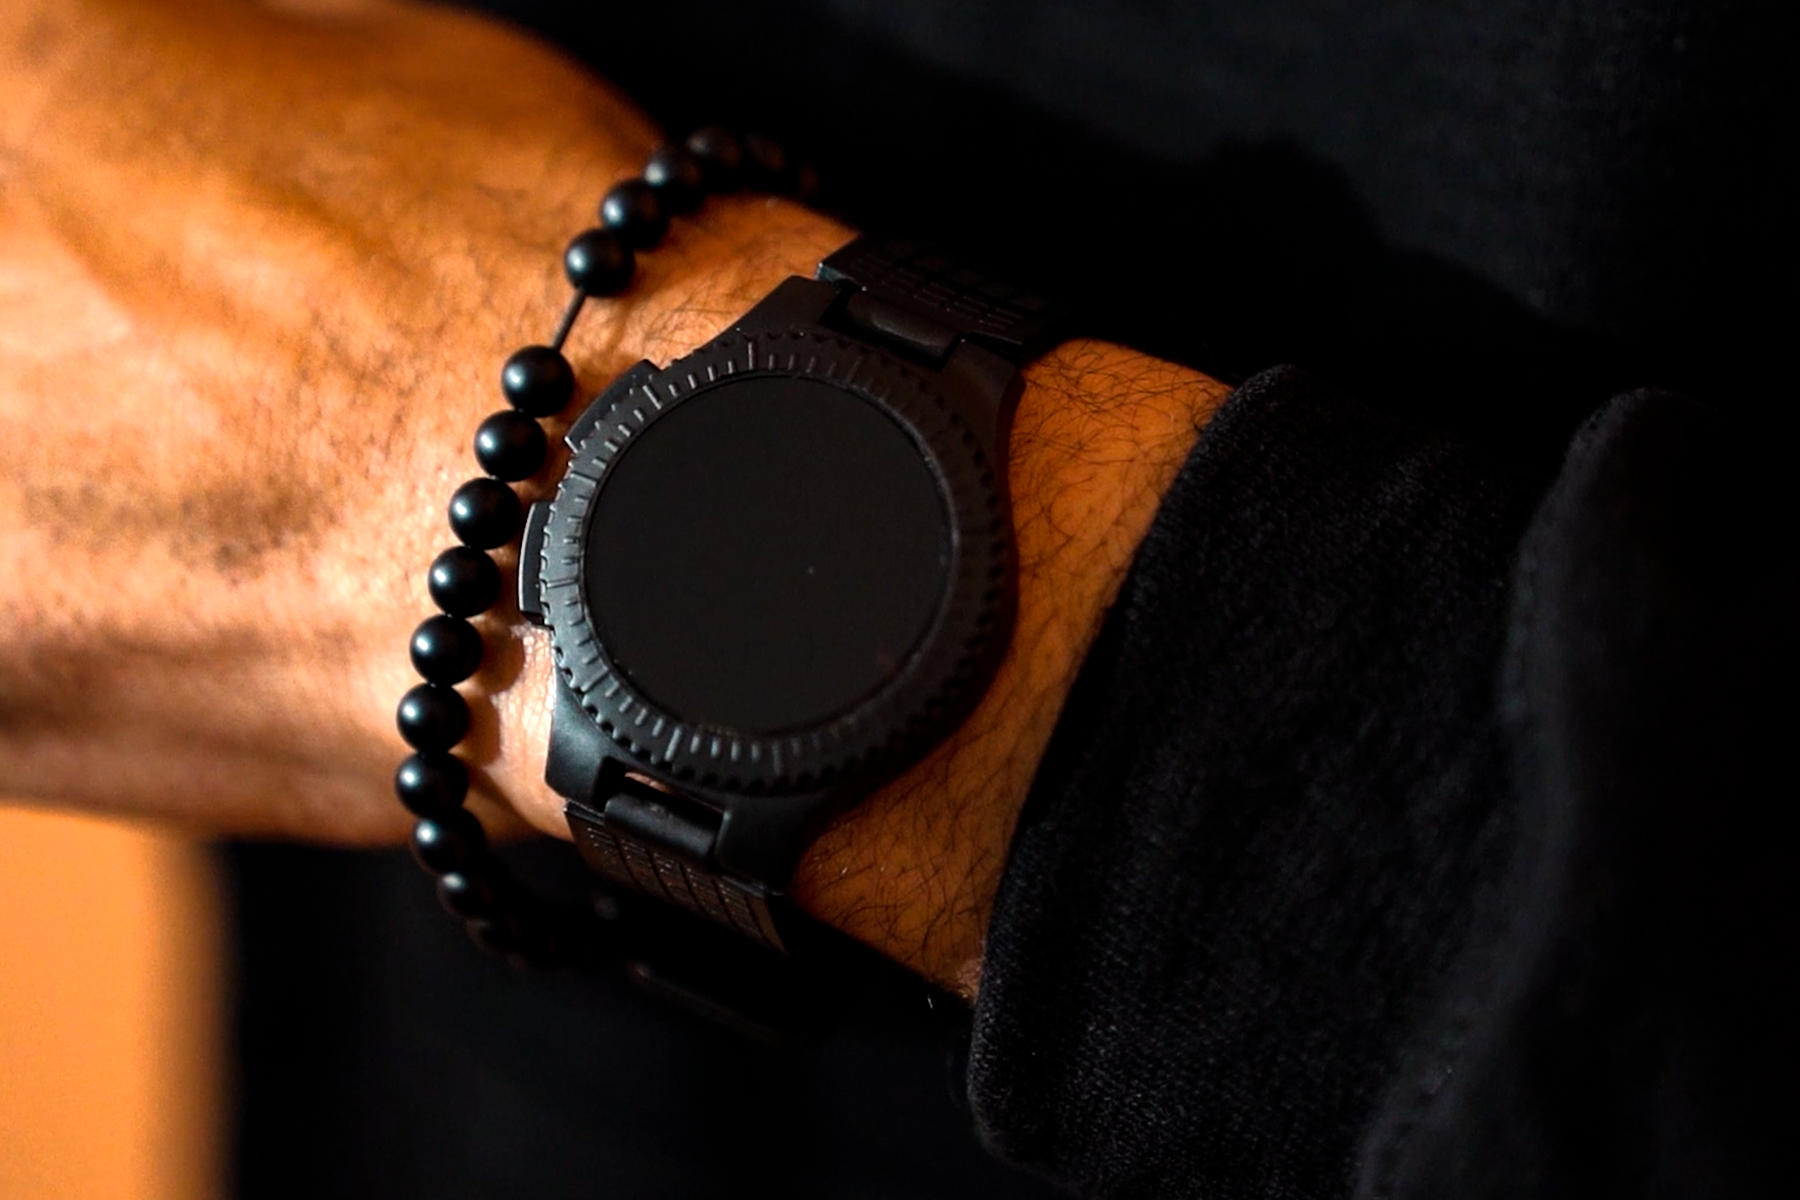 Black Ops Watch Acrylic Disk by Ellusionist | Ellusionist